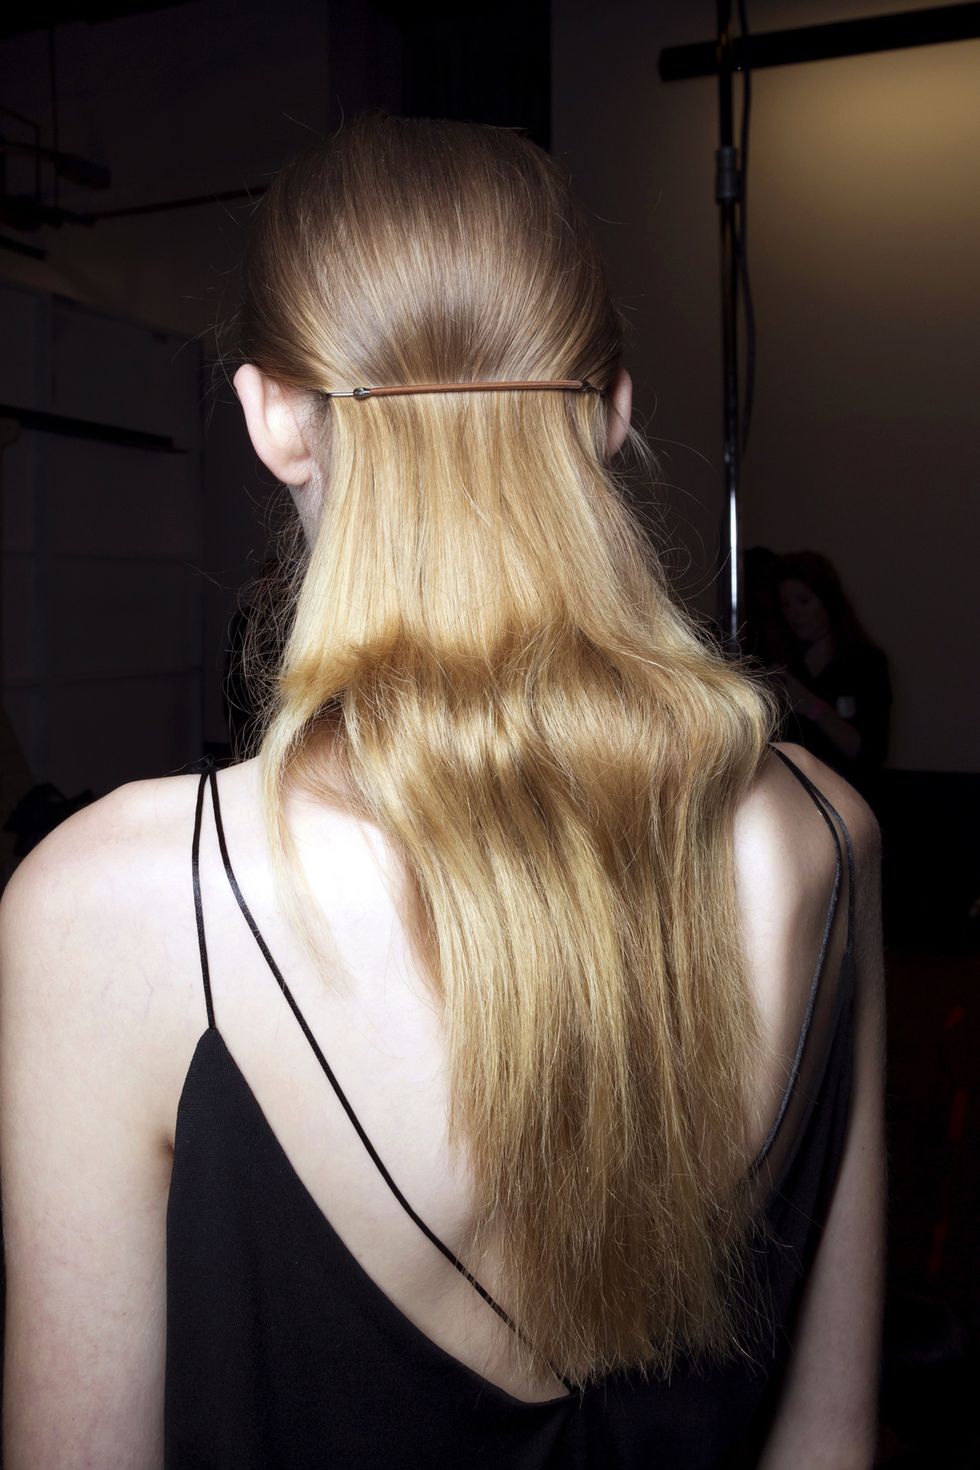 Hairstyle, Shoulder, Joint, Back, Style, Blond, Long hair, Fashion, Neck, Black, 